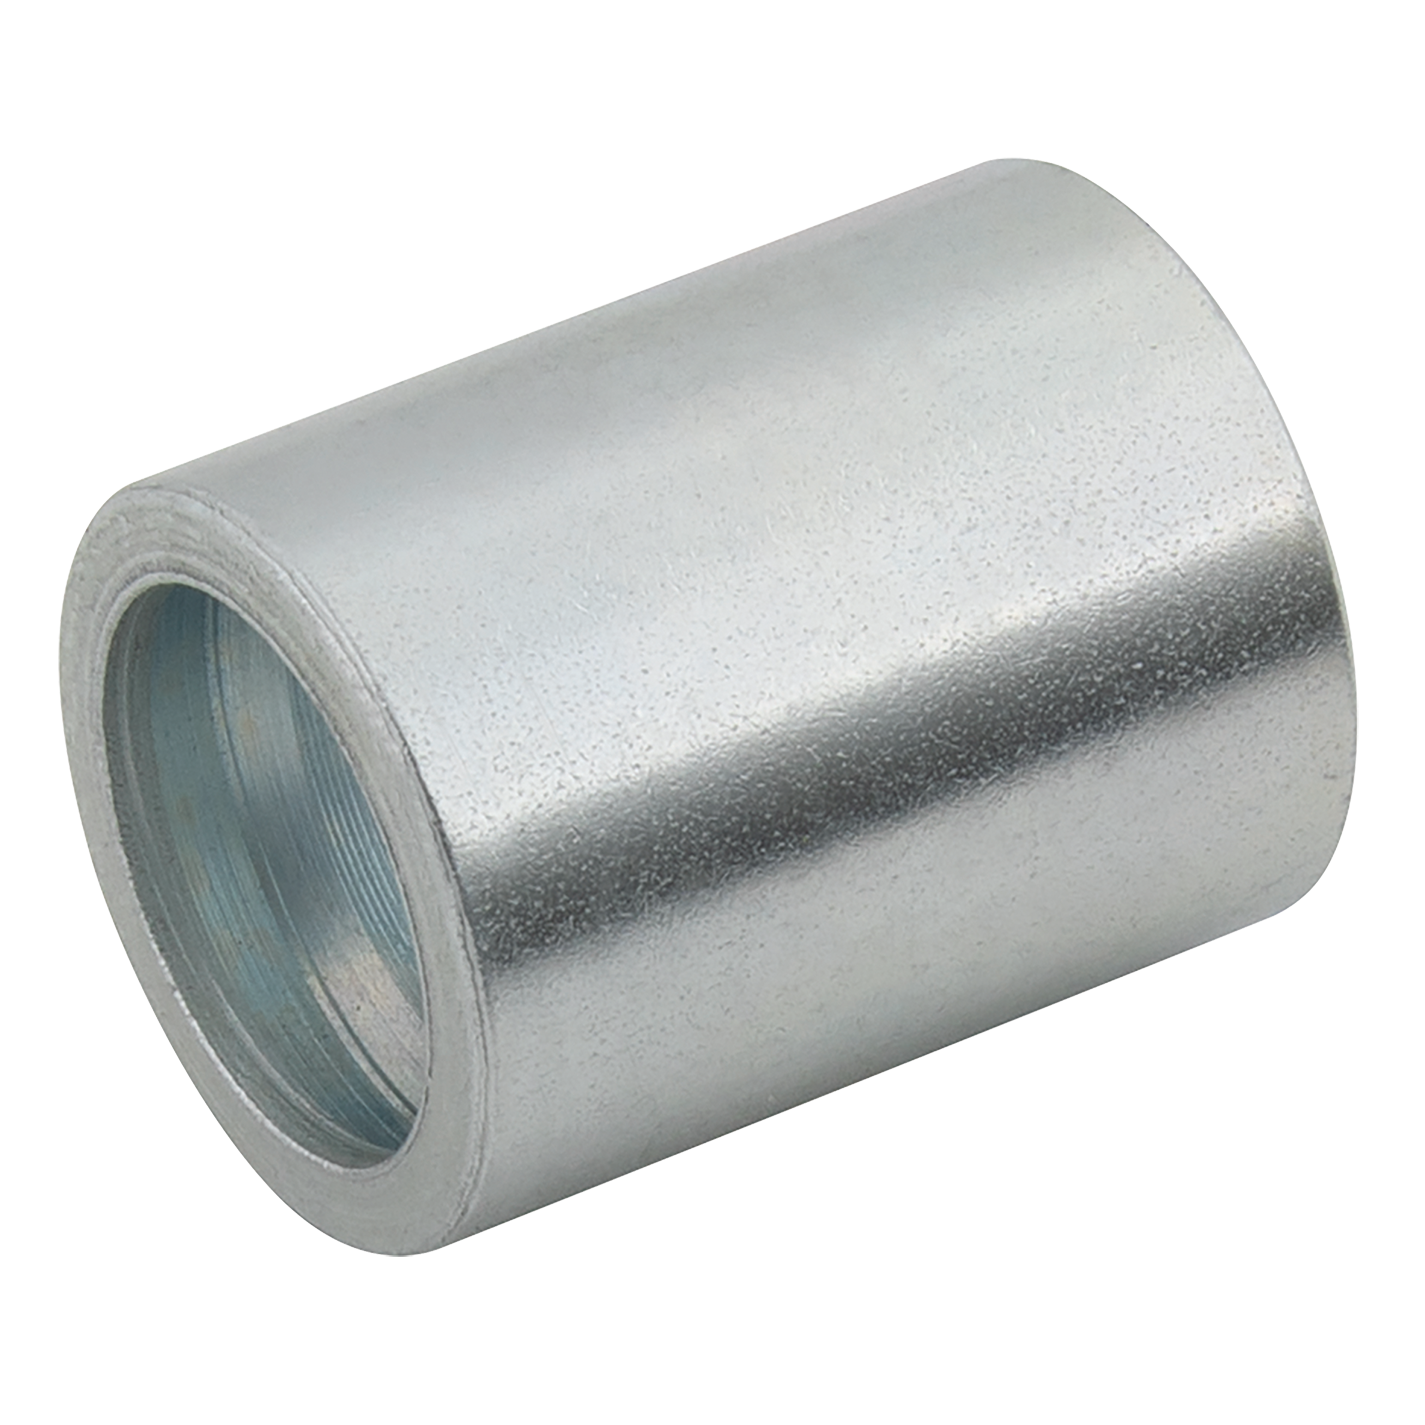 1/4"Hose Insert Ferrule Smooth and Convoluted Bore